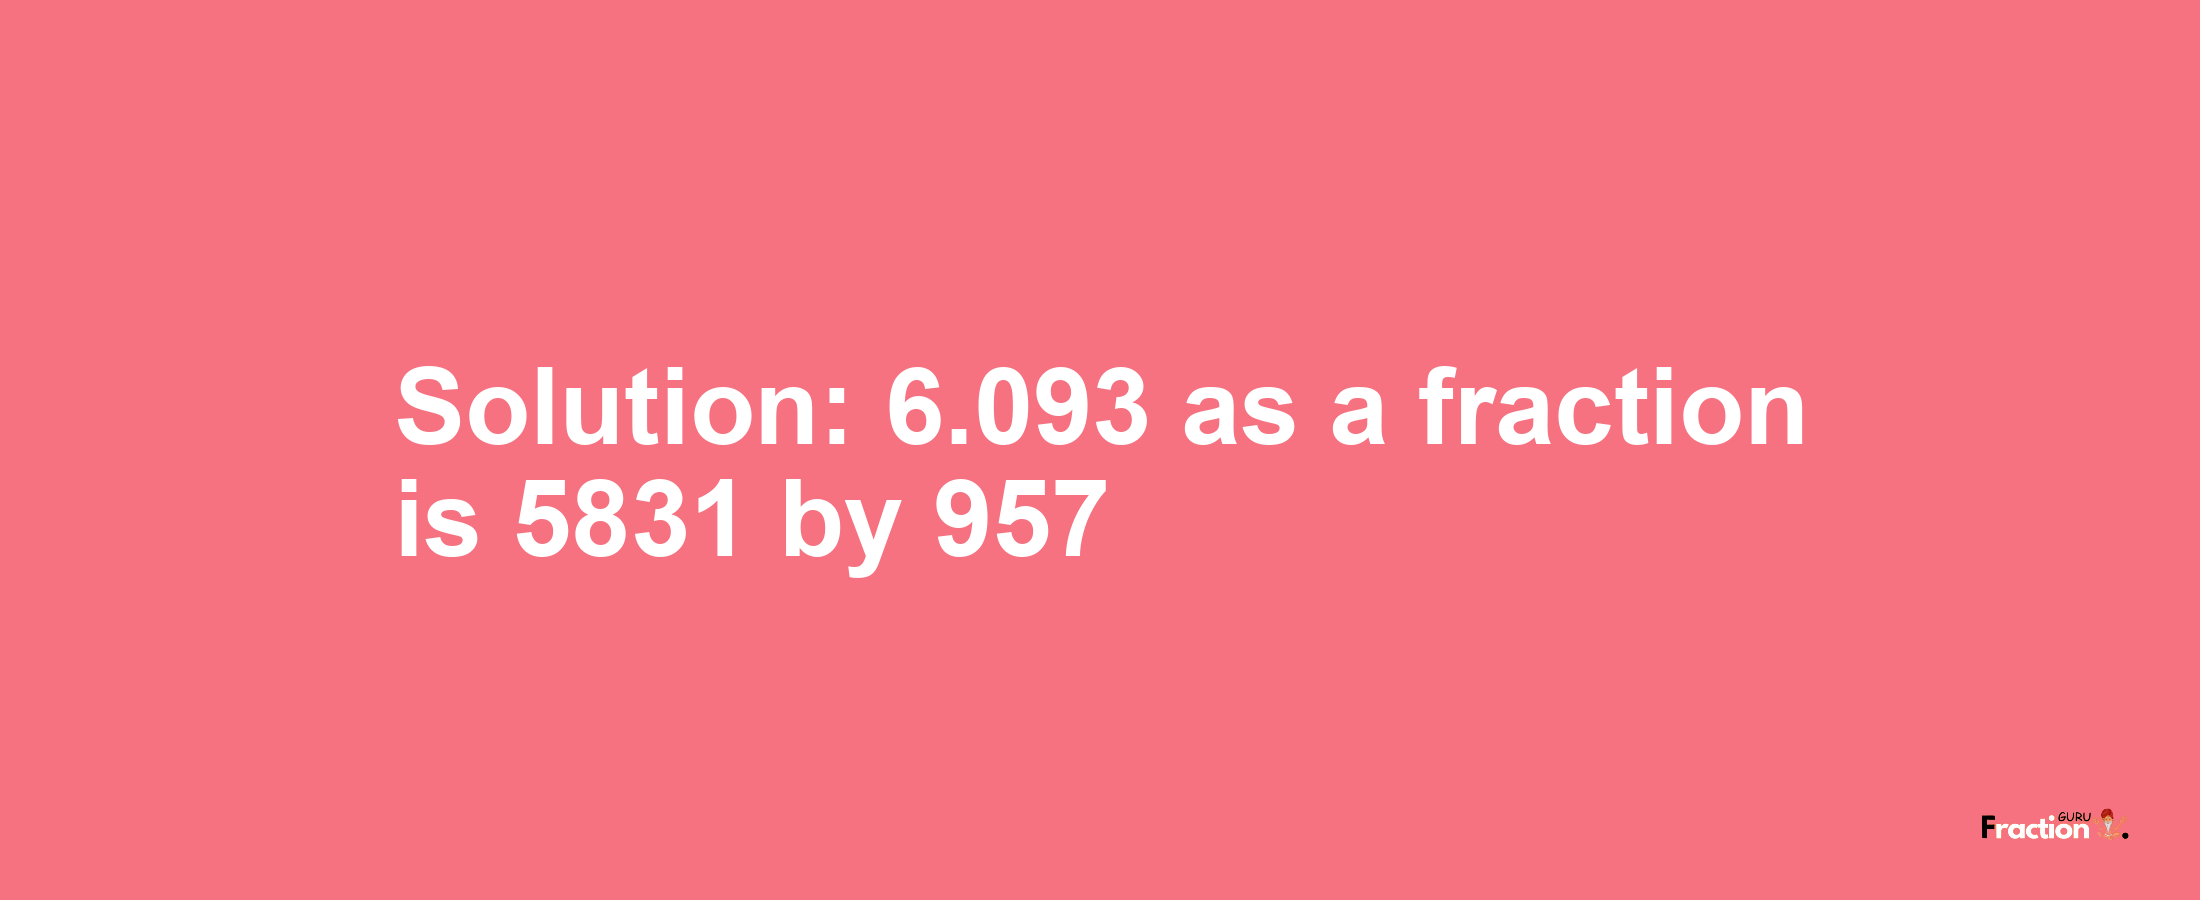 Solution:6.093 as a fraction is 5831/957